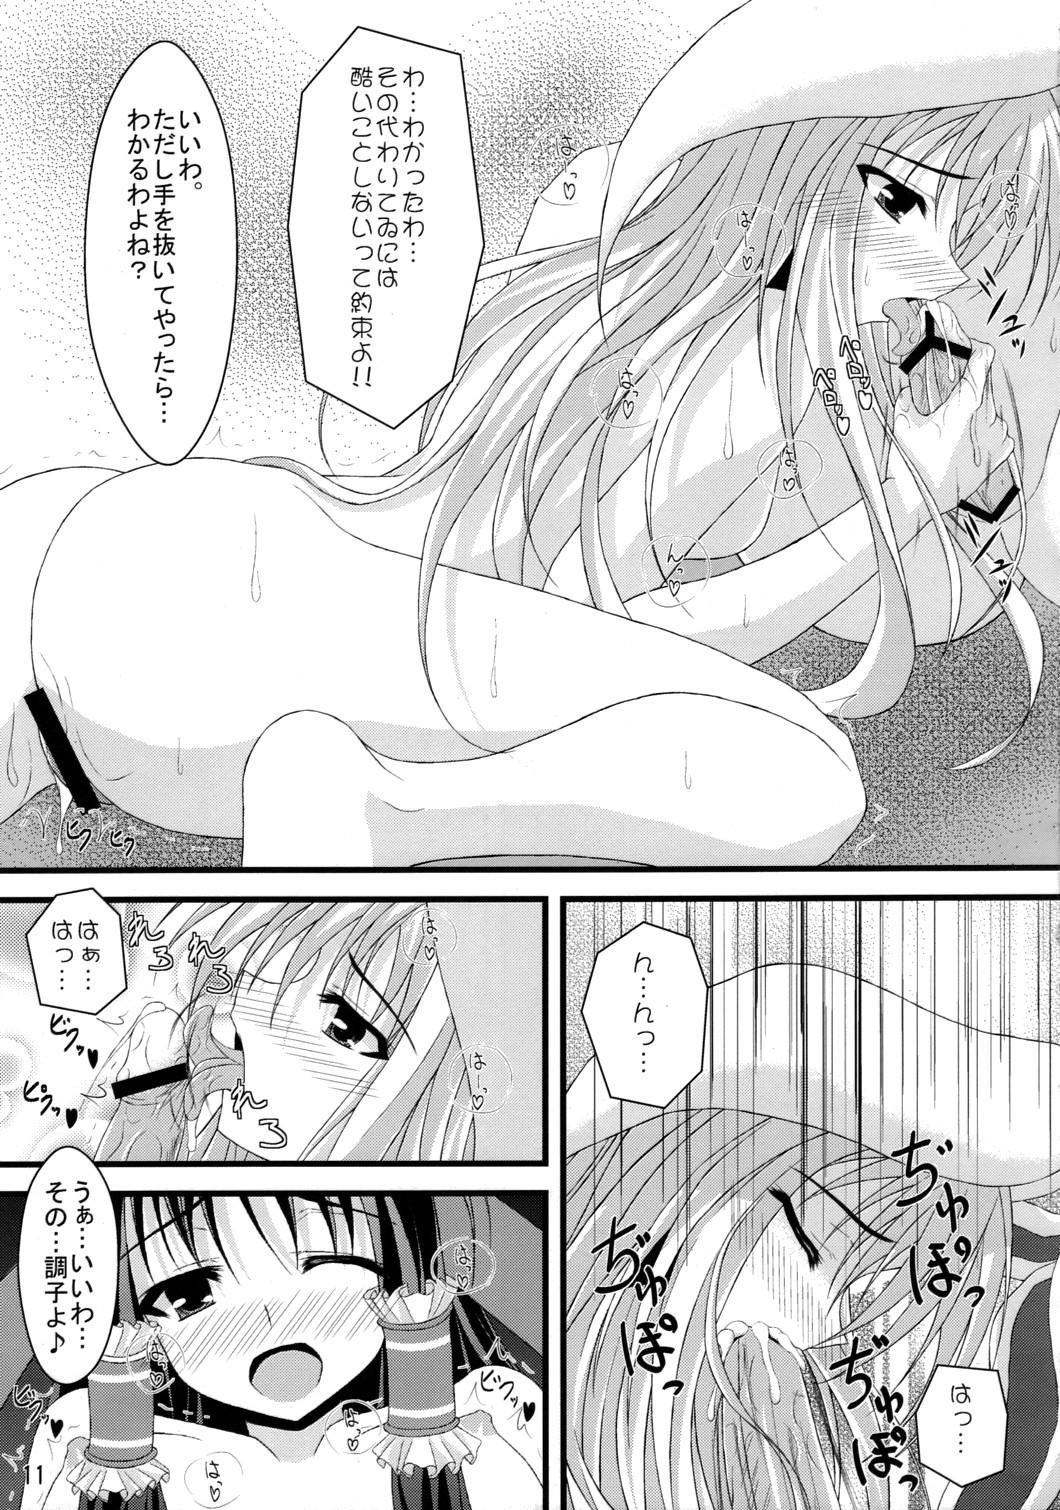 Trans Tele-Mesmerism - Touhou project Natural Boobs - Page 10